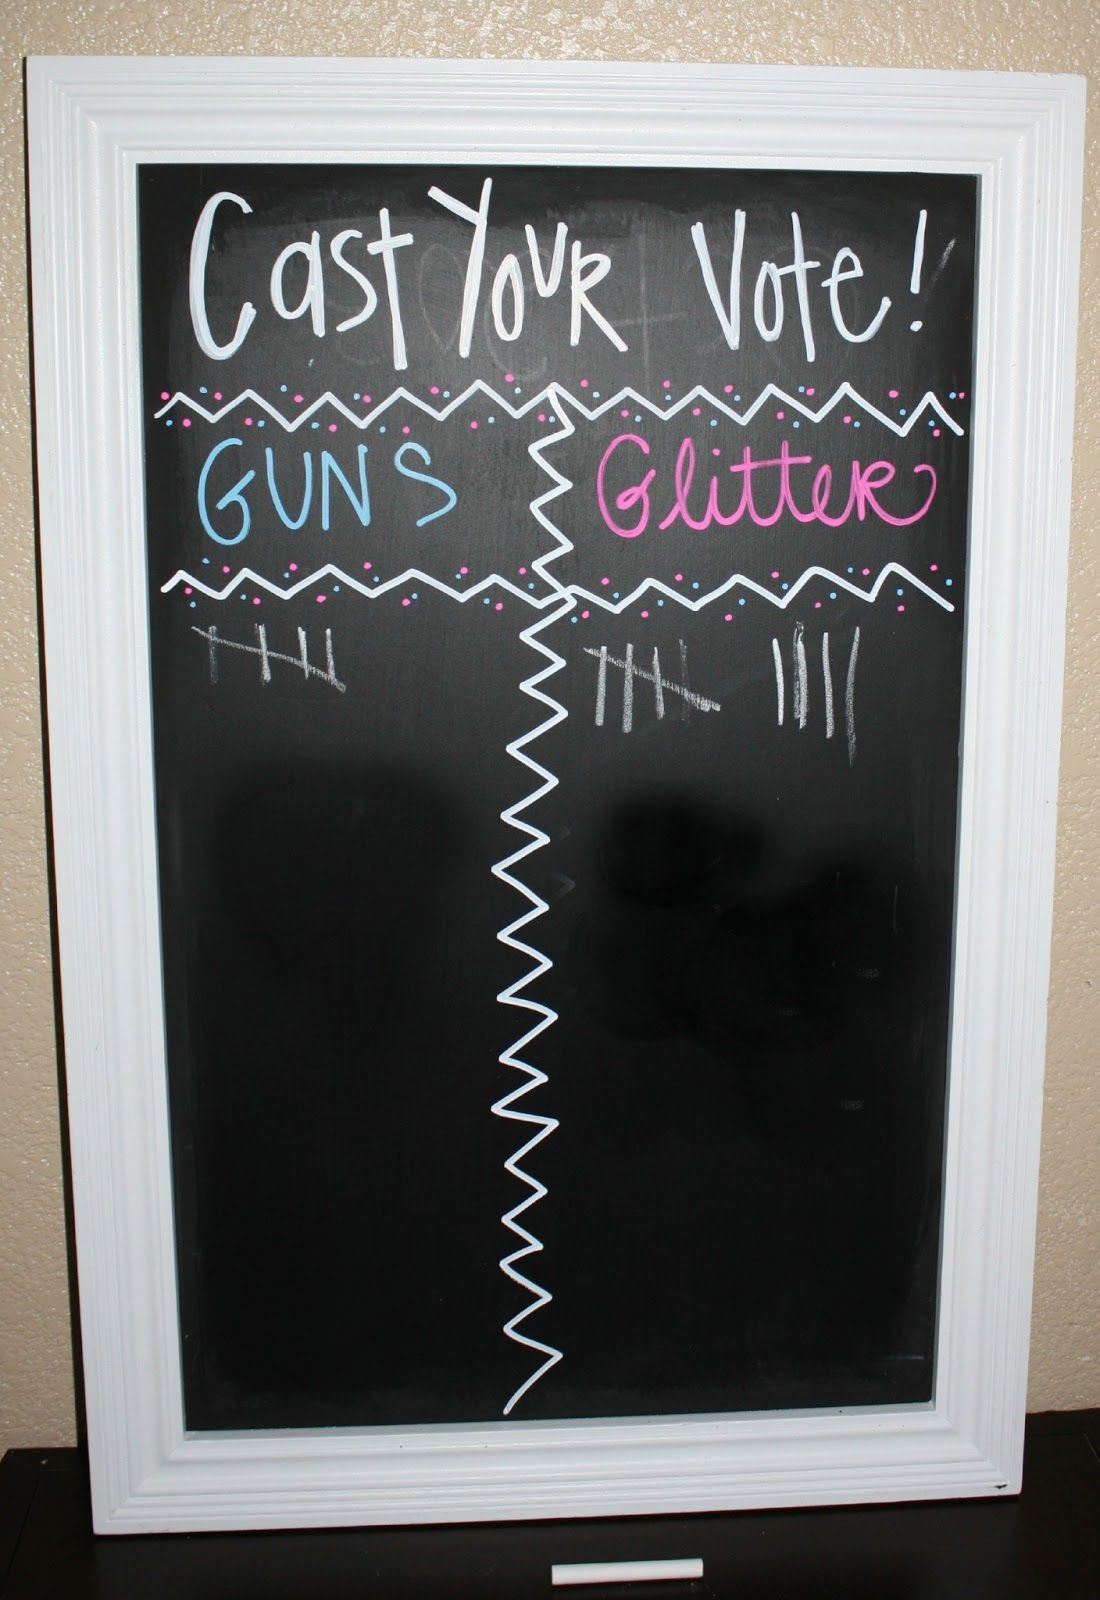 dont know if i would use “guns” or “glitter” but yet another great use out of a chalkboard! Gender Reveal Party